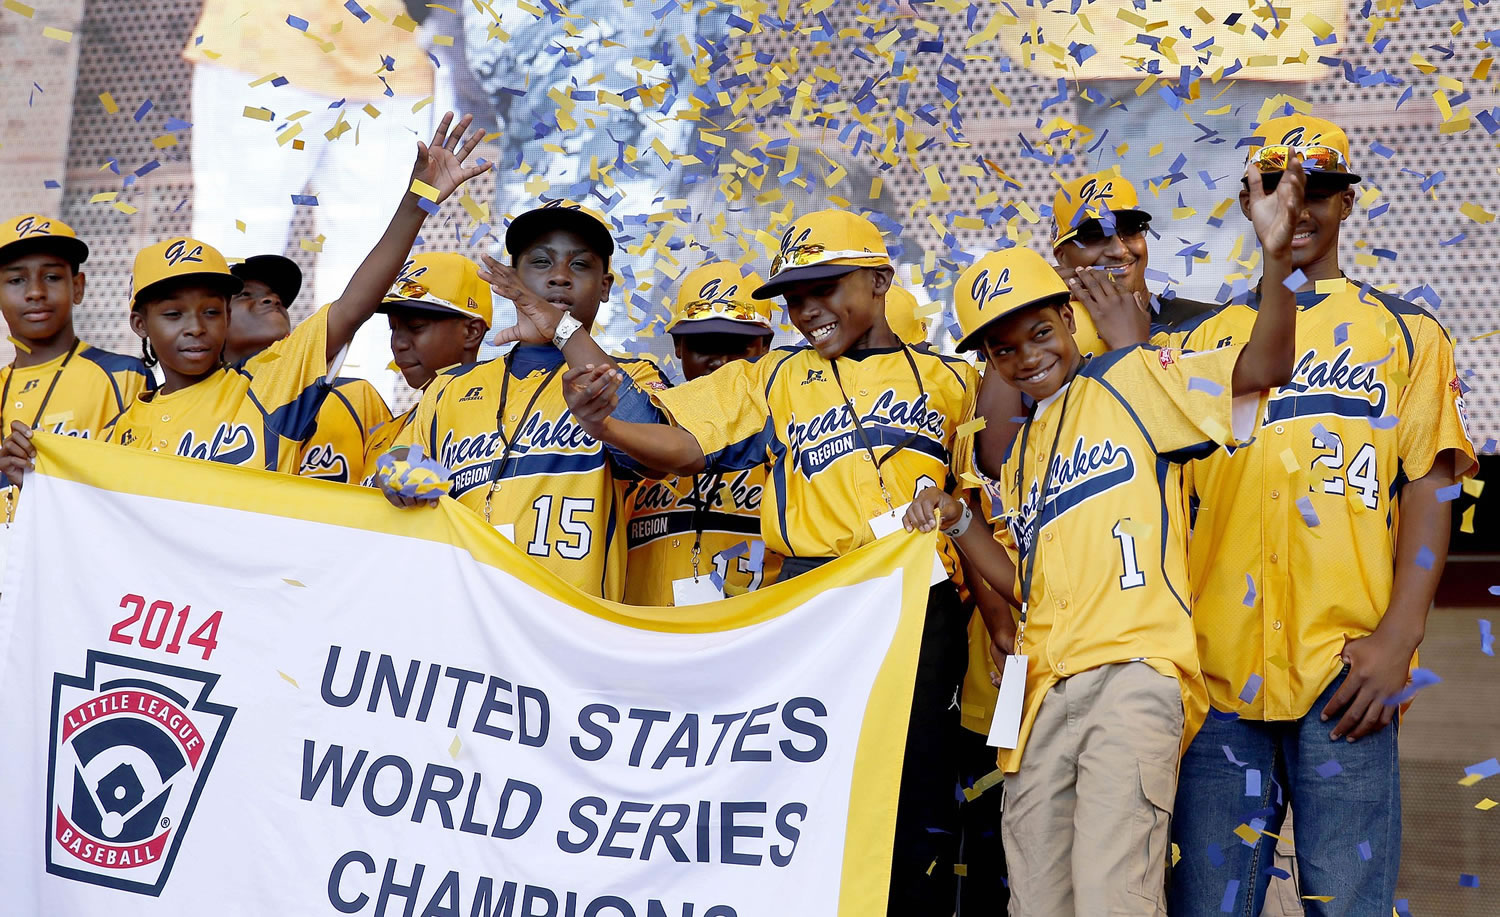 Members of the Jackie Robinson West Little League baseball team participate in a rally on Aug. 27, 2014, celebrating the team's U.S. Little League Championship in Chicago. Little League International has since stripped Chicago's Jackie Robinson West team of its national title.